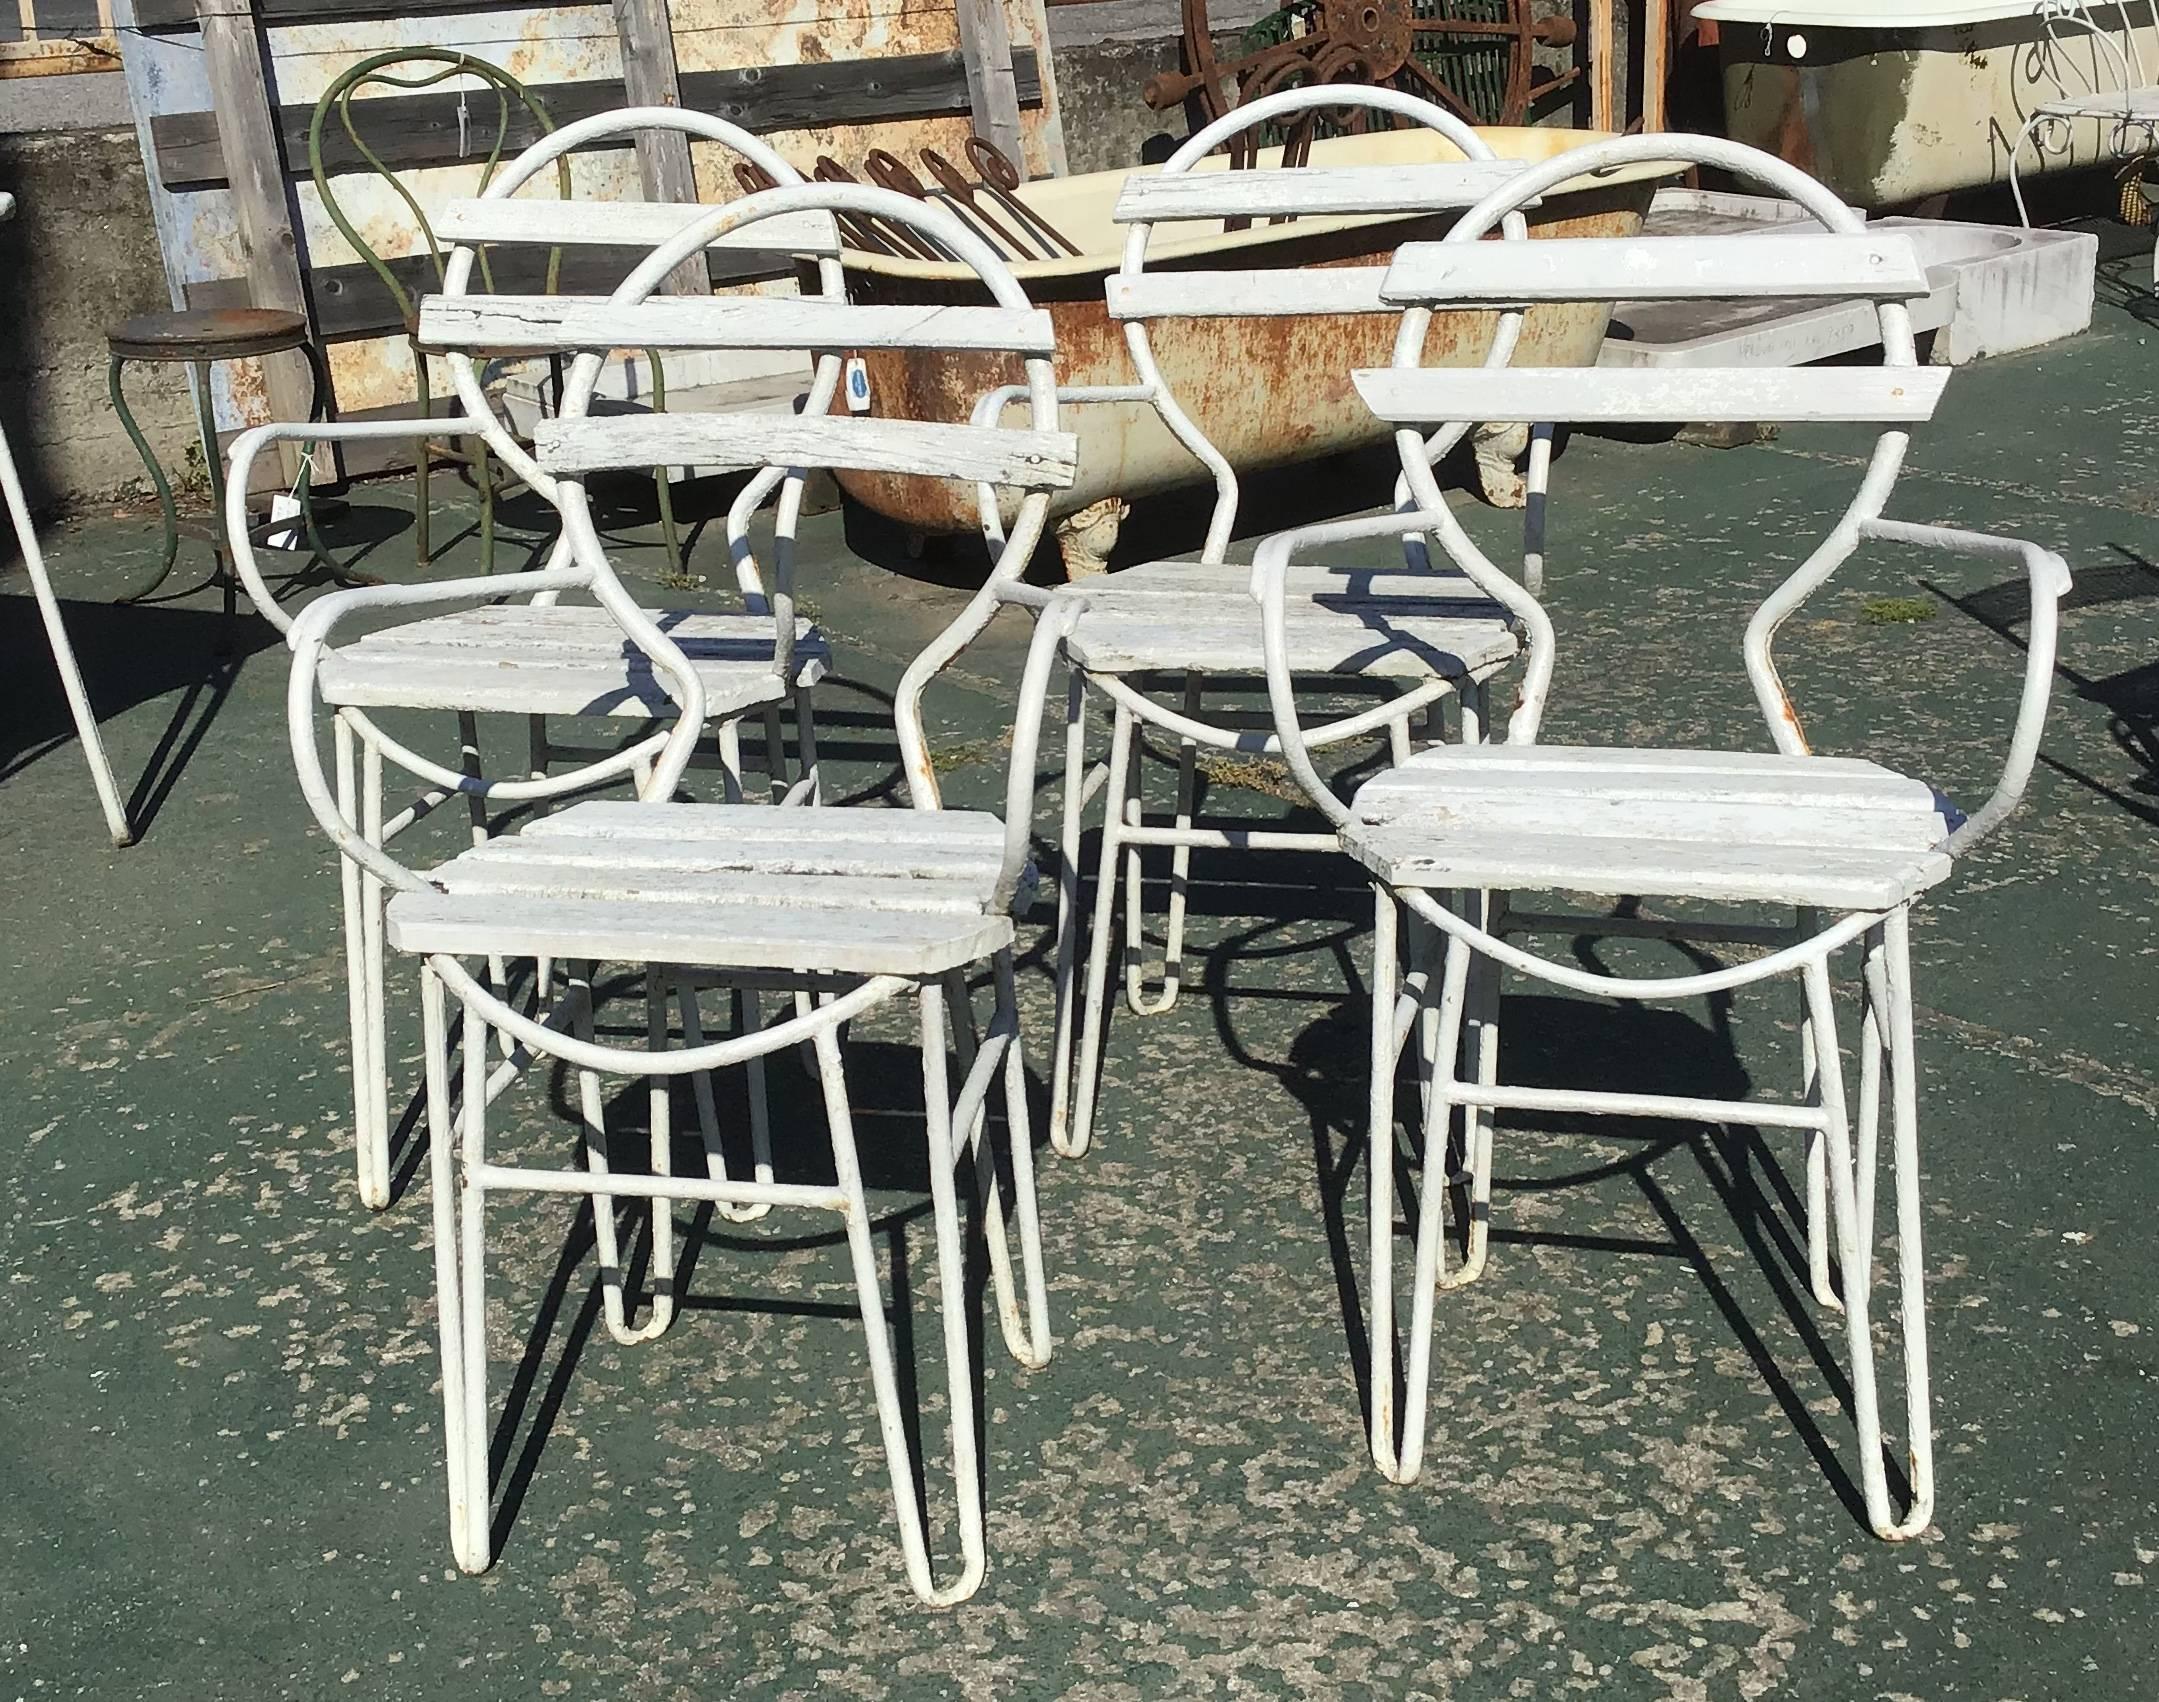 Italian midcentury garden chairs in white lacquered iron and wood from 1960s.